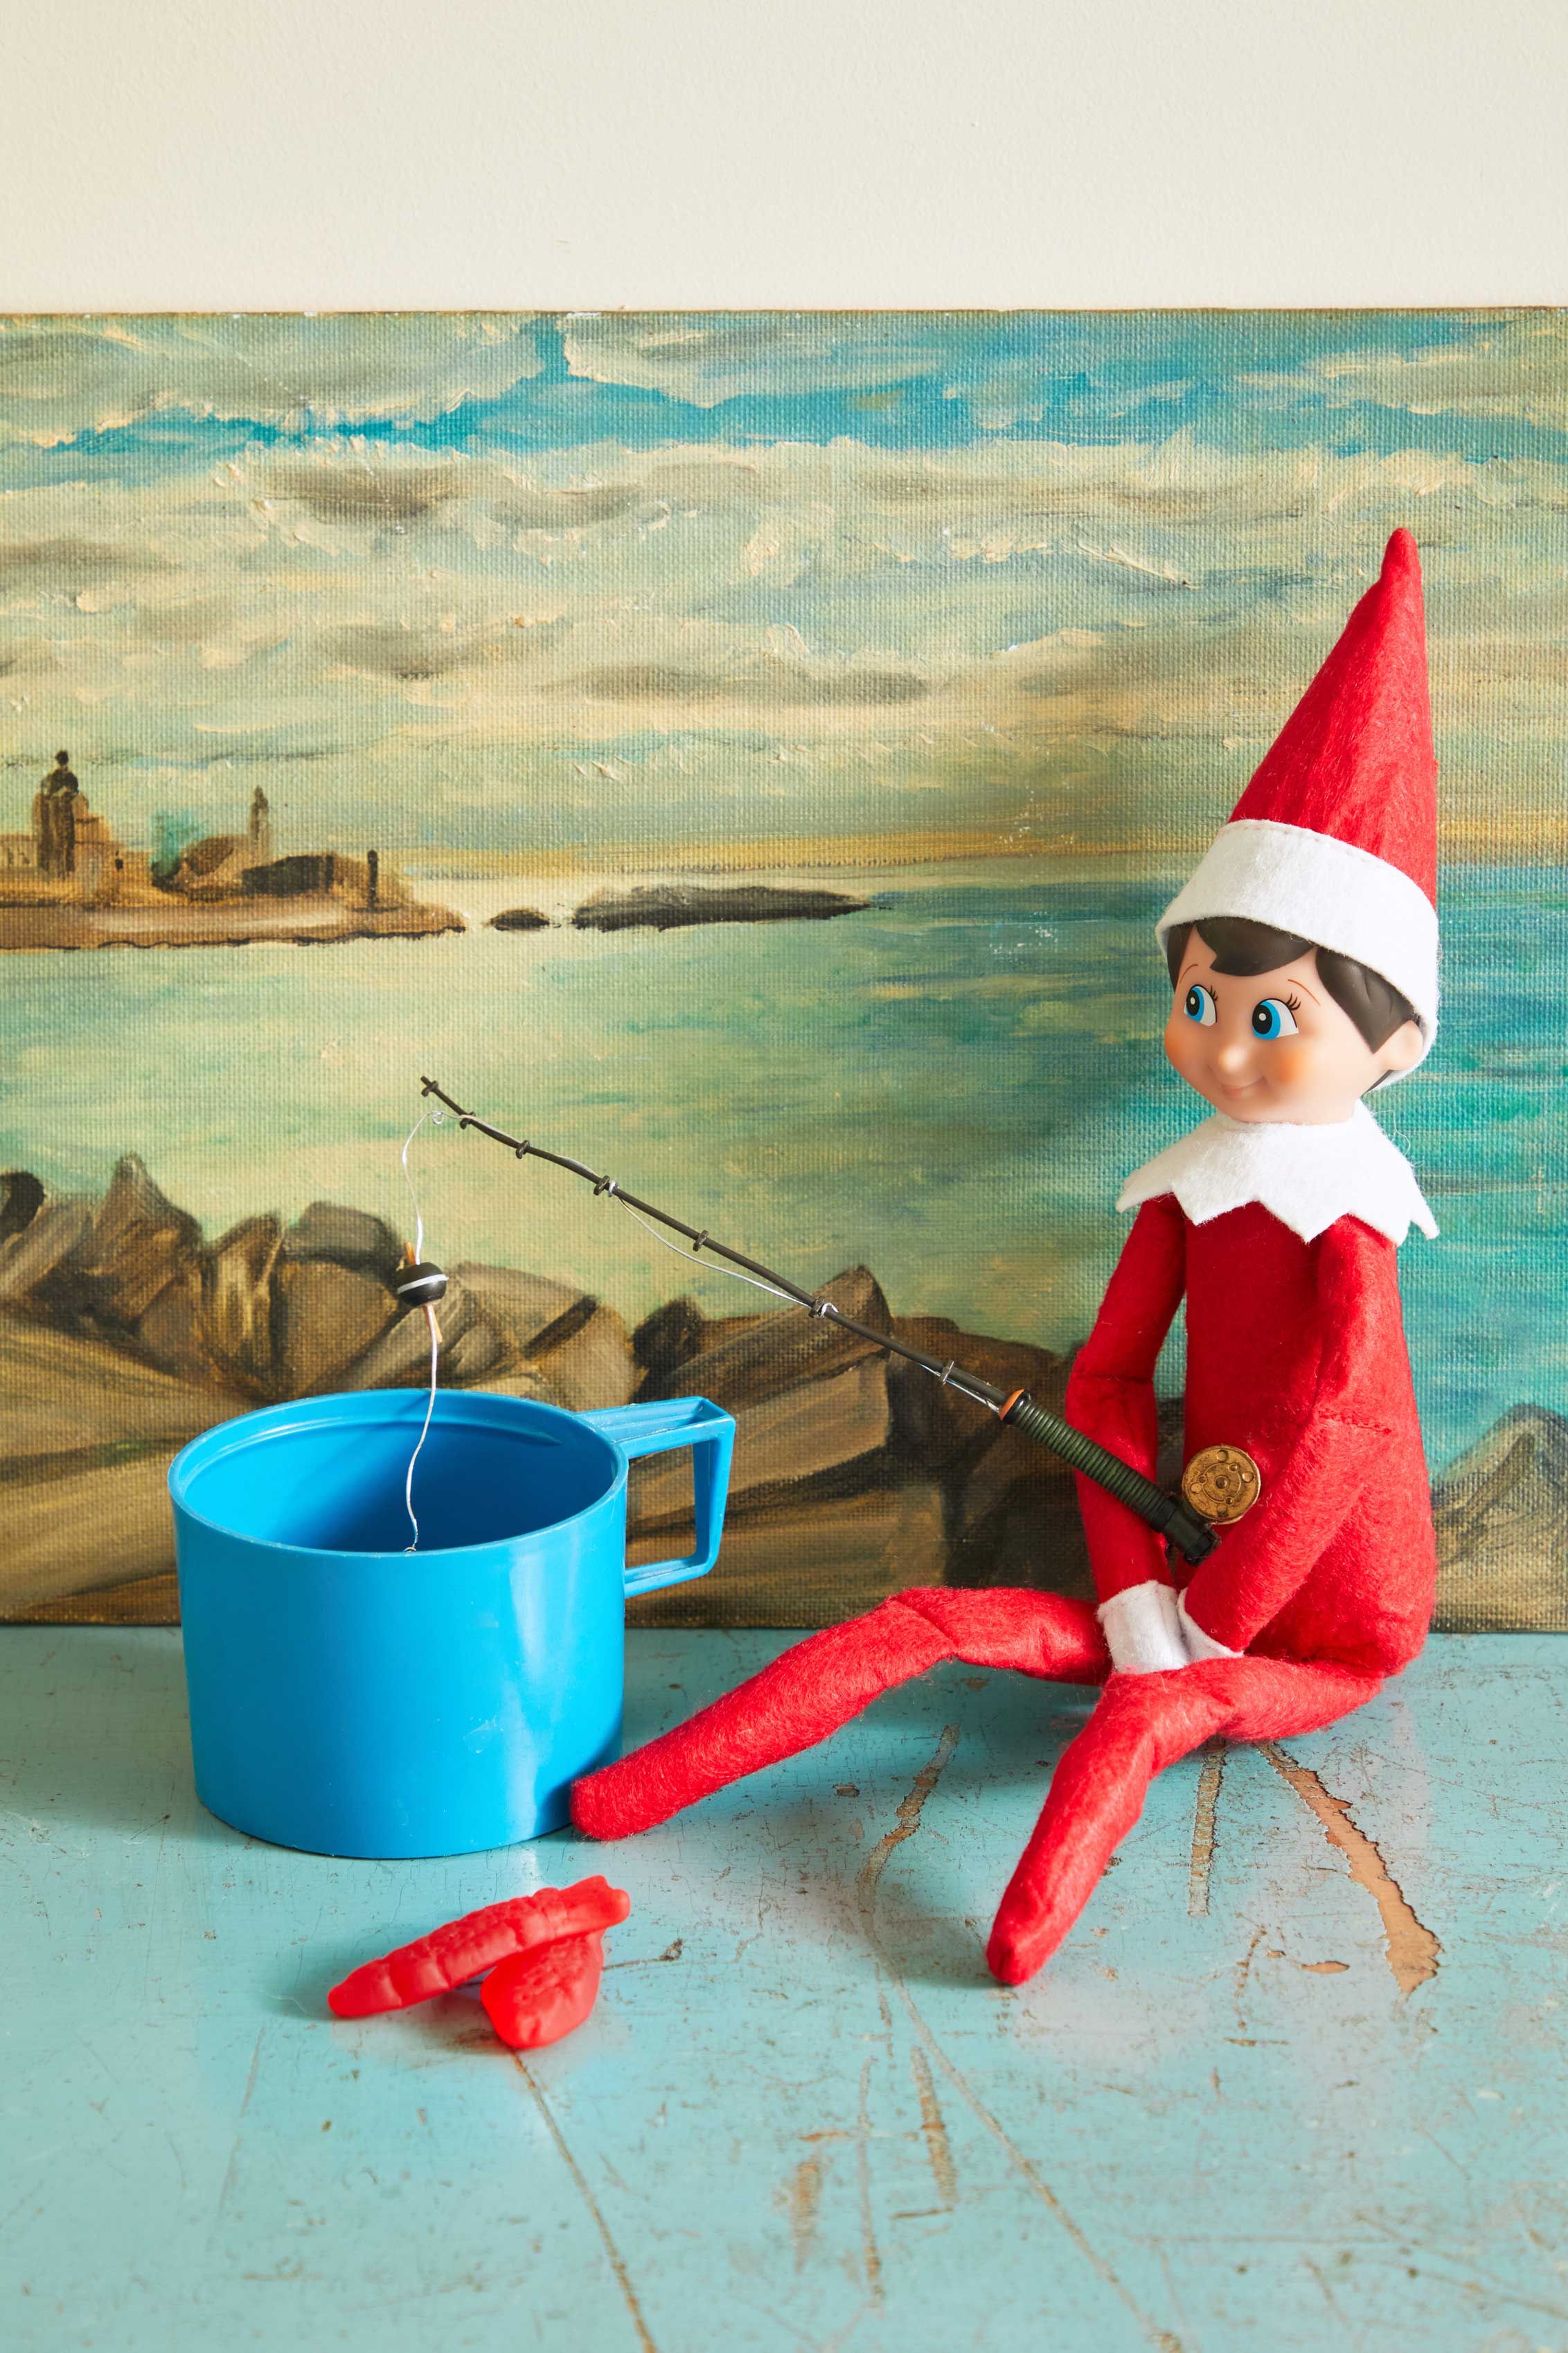 The 11 Craziest Places People Have Put Their Elf on the Shelf